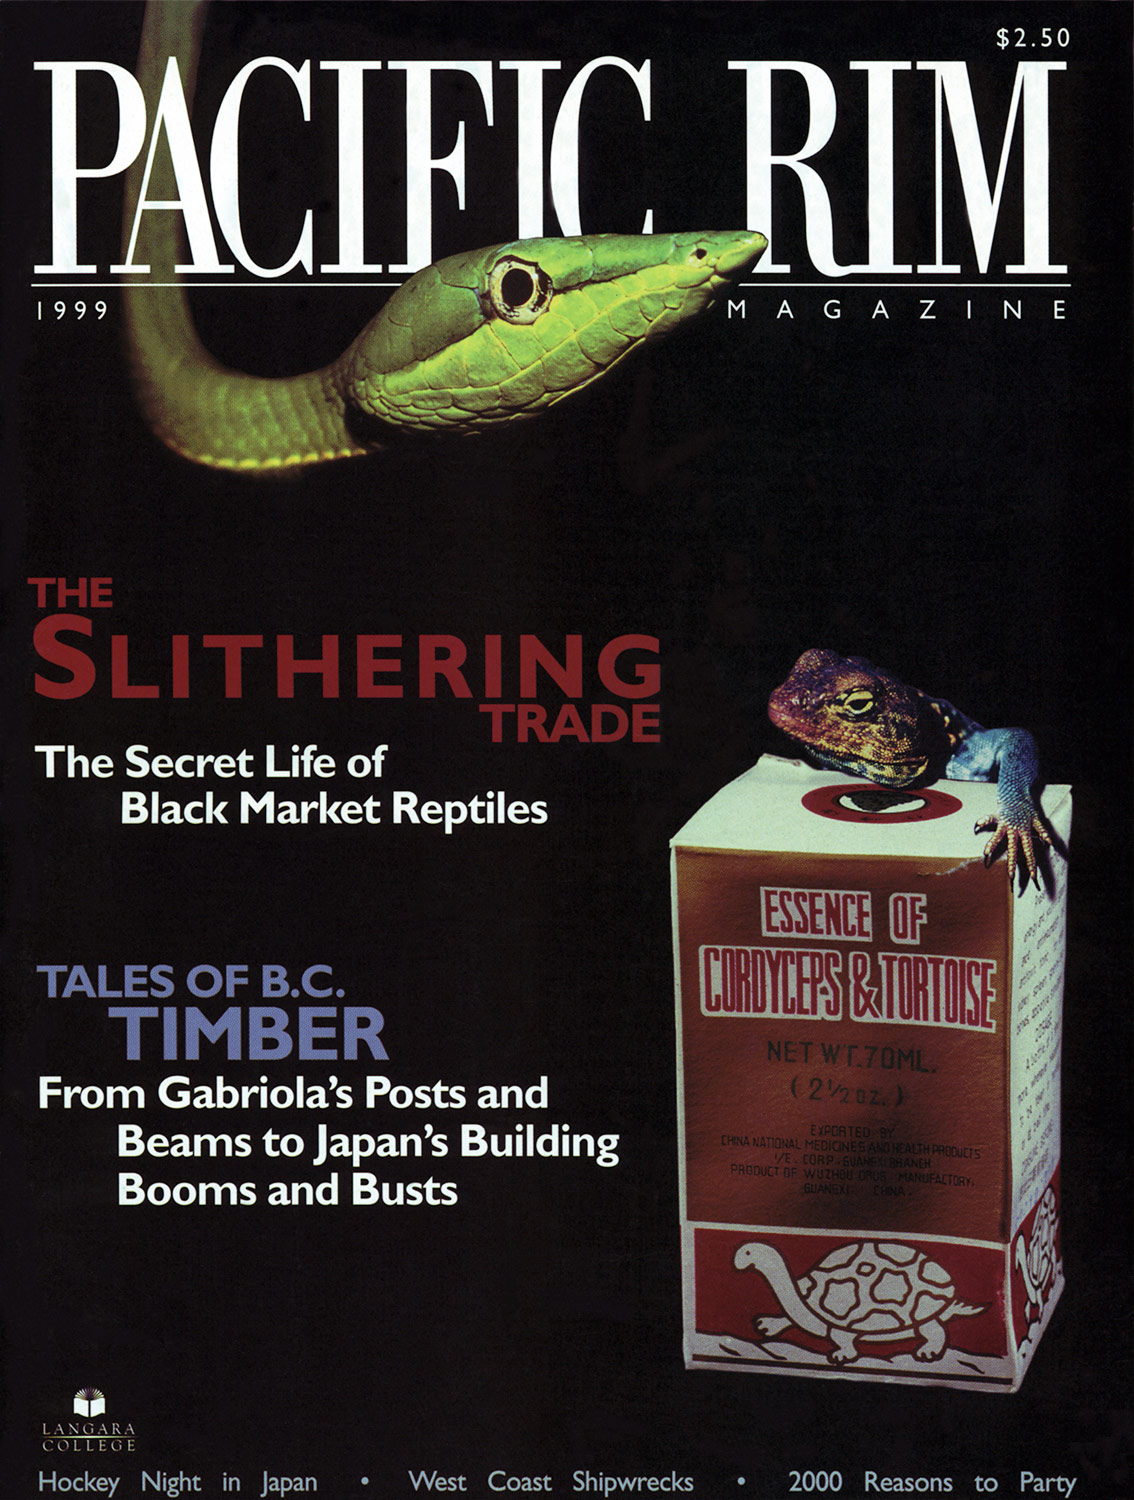 1999 Pacific Rim Cover. "The slithering trade." Cover Story. Image of snake.